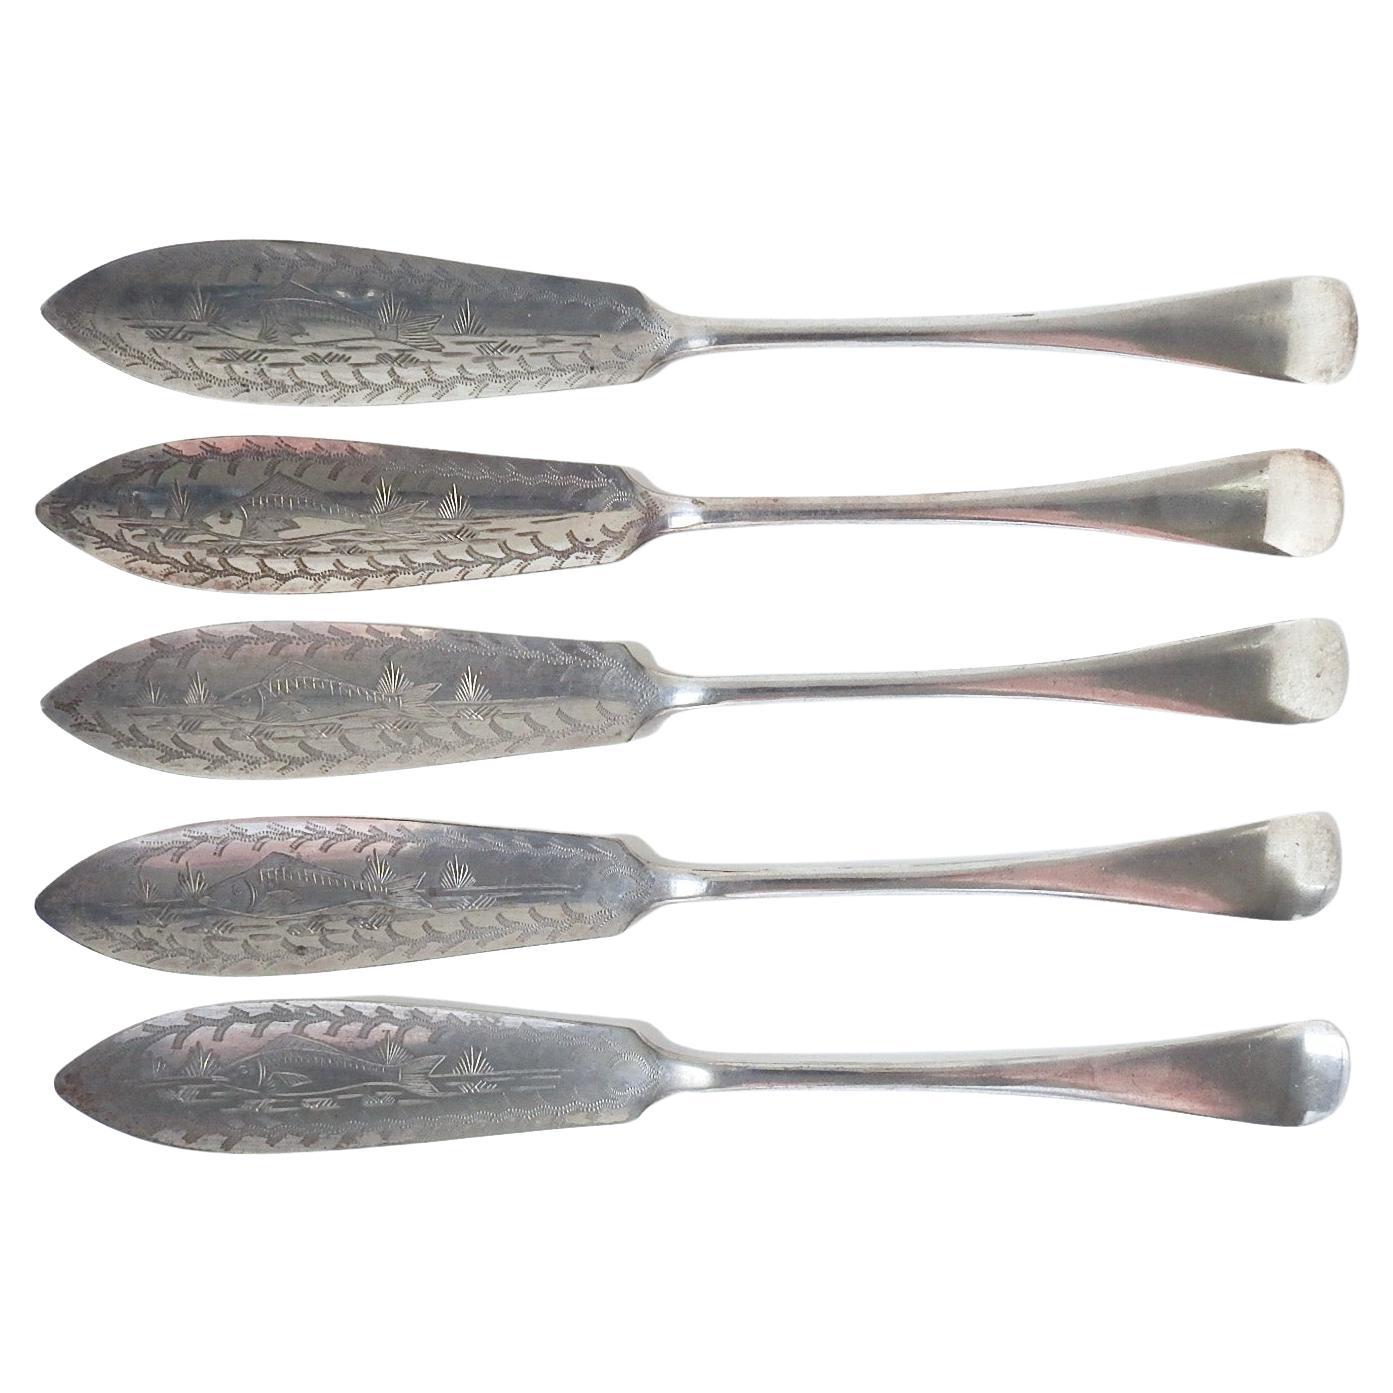 Antique Engraved Silverplate Fish Knives, Set of 5